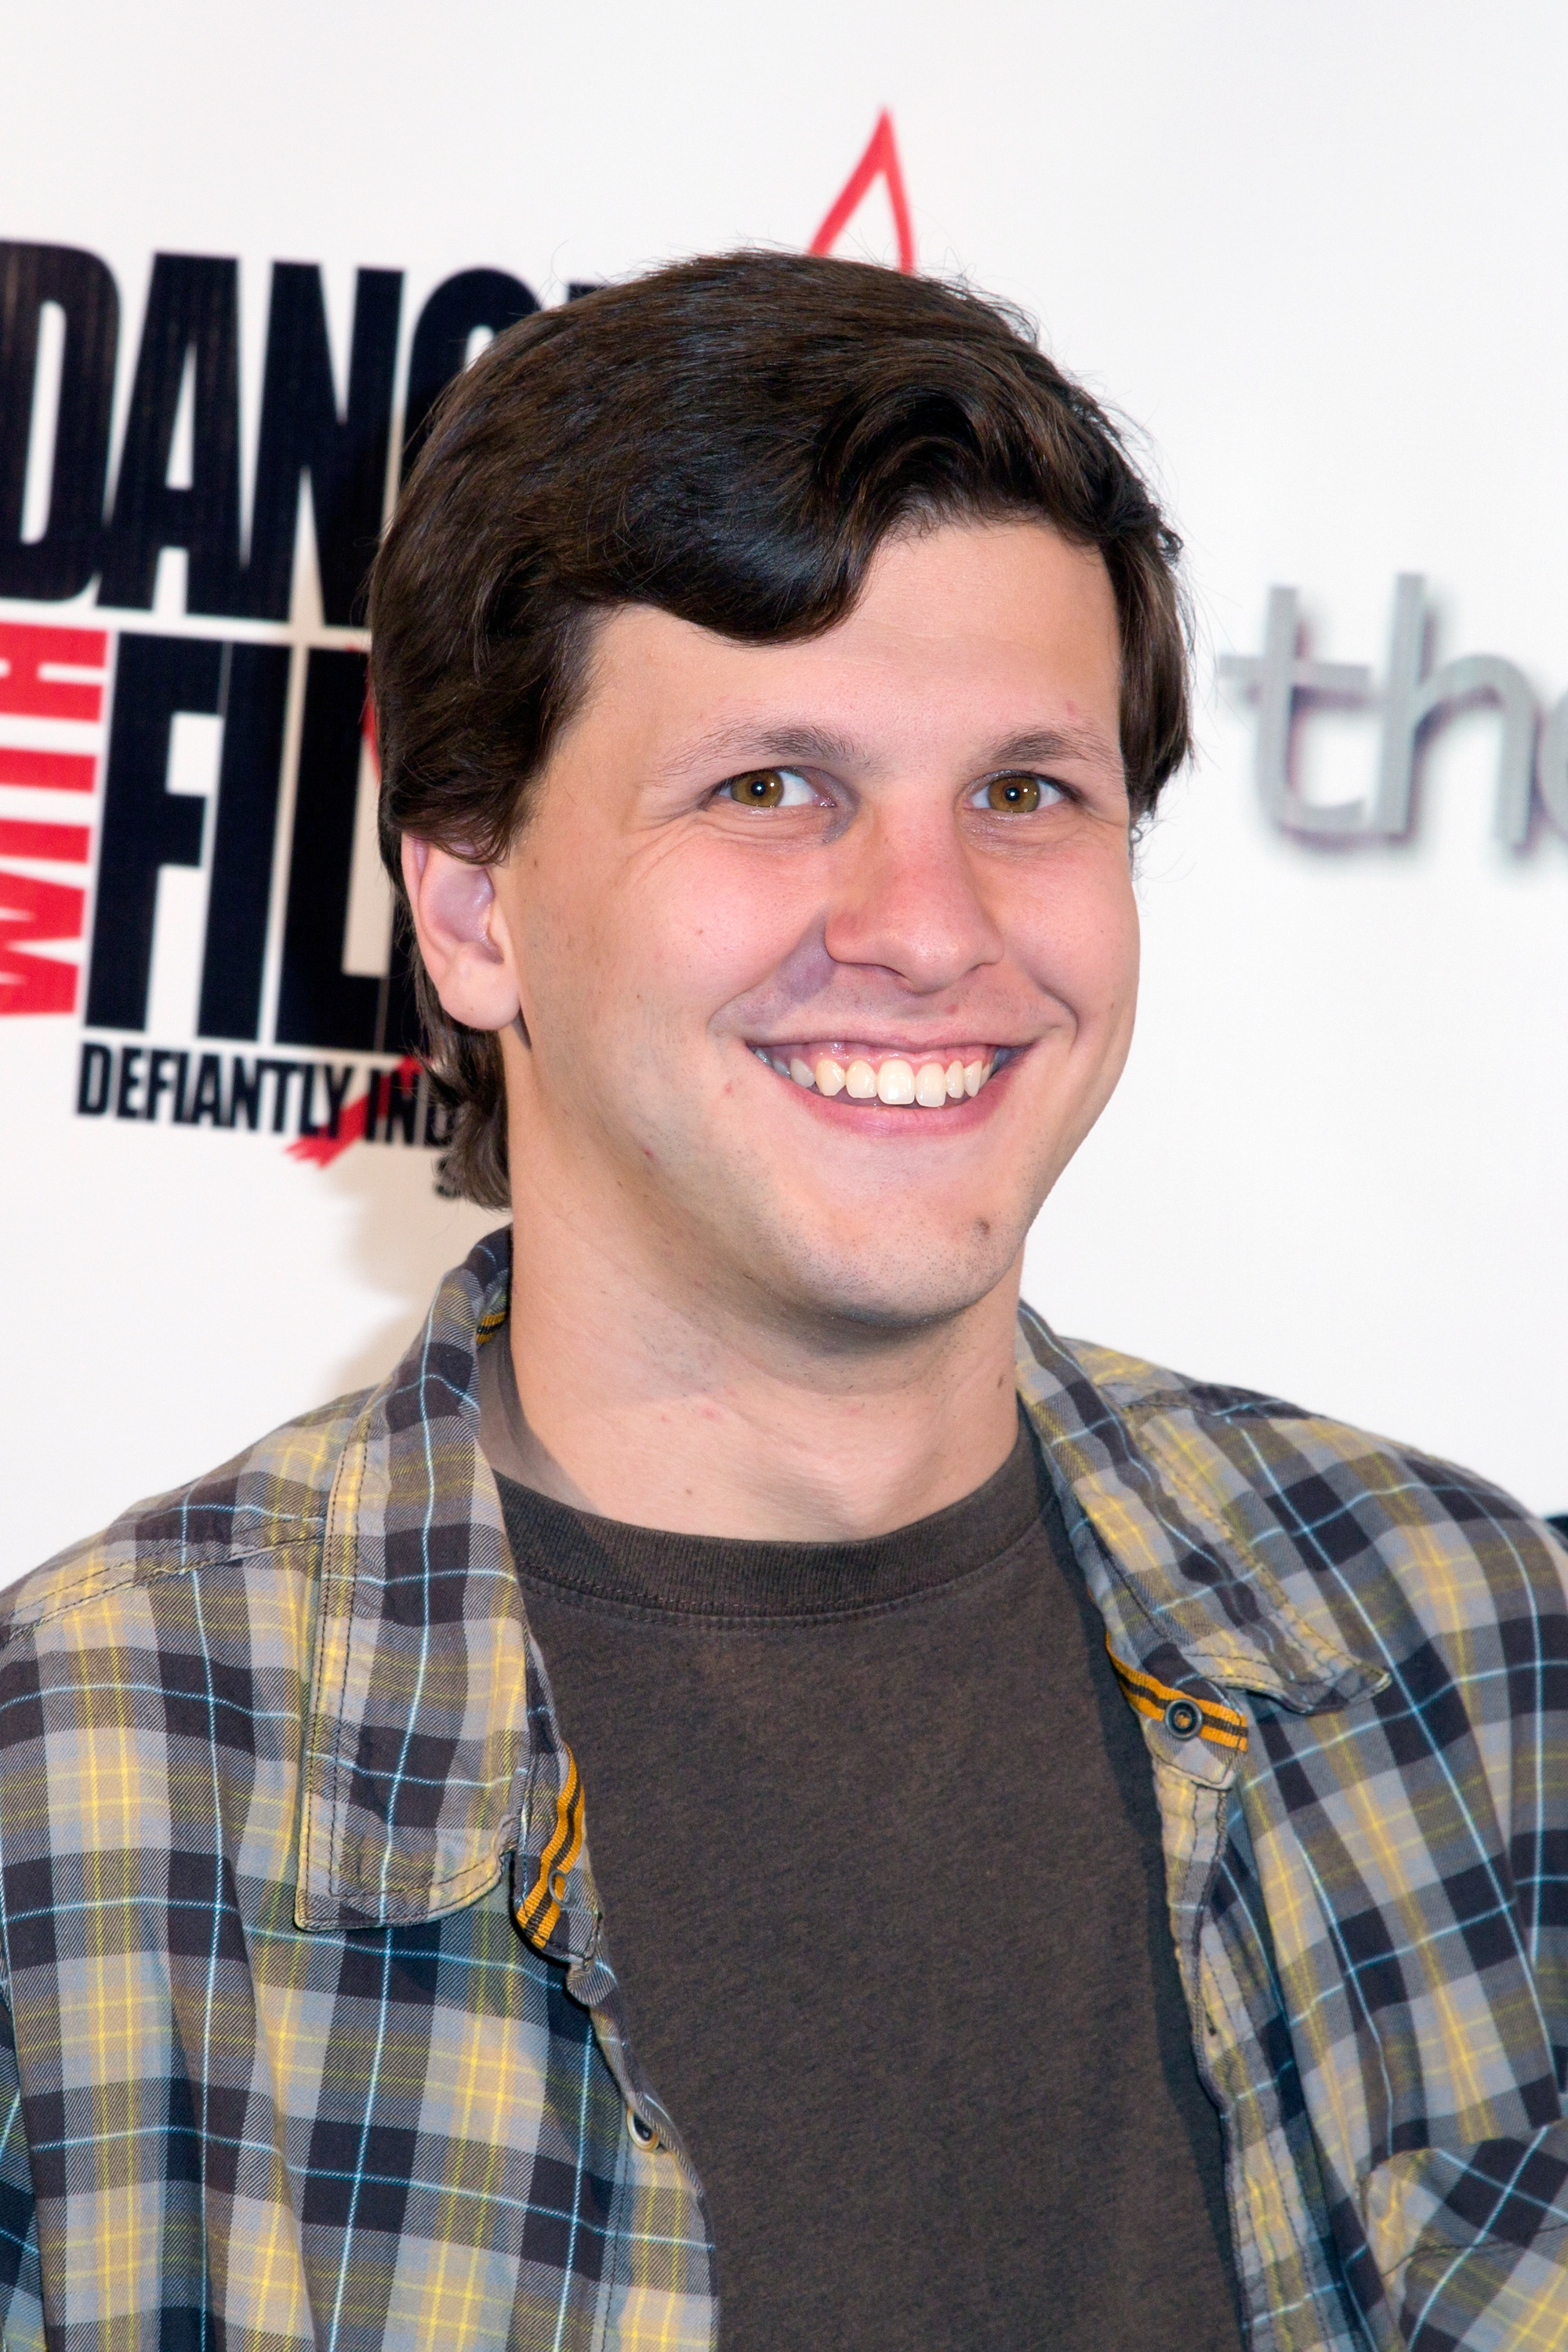 Dyllan smiling at a media event and wearing a plaid top